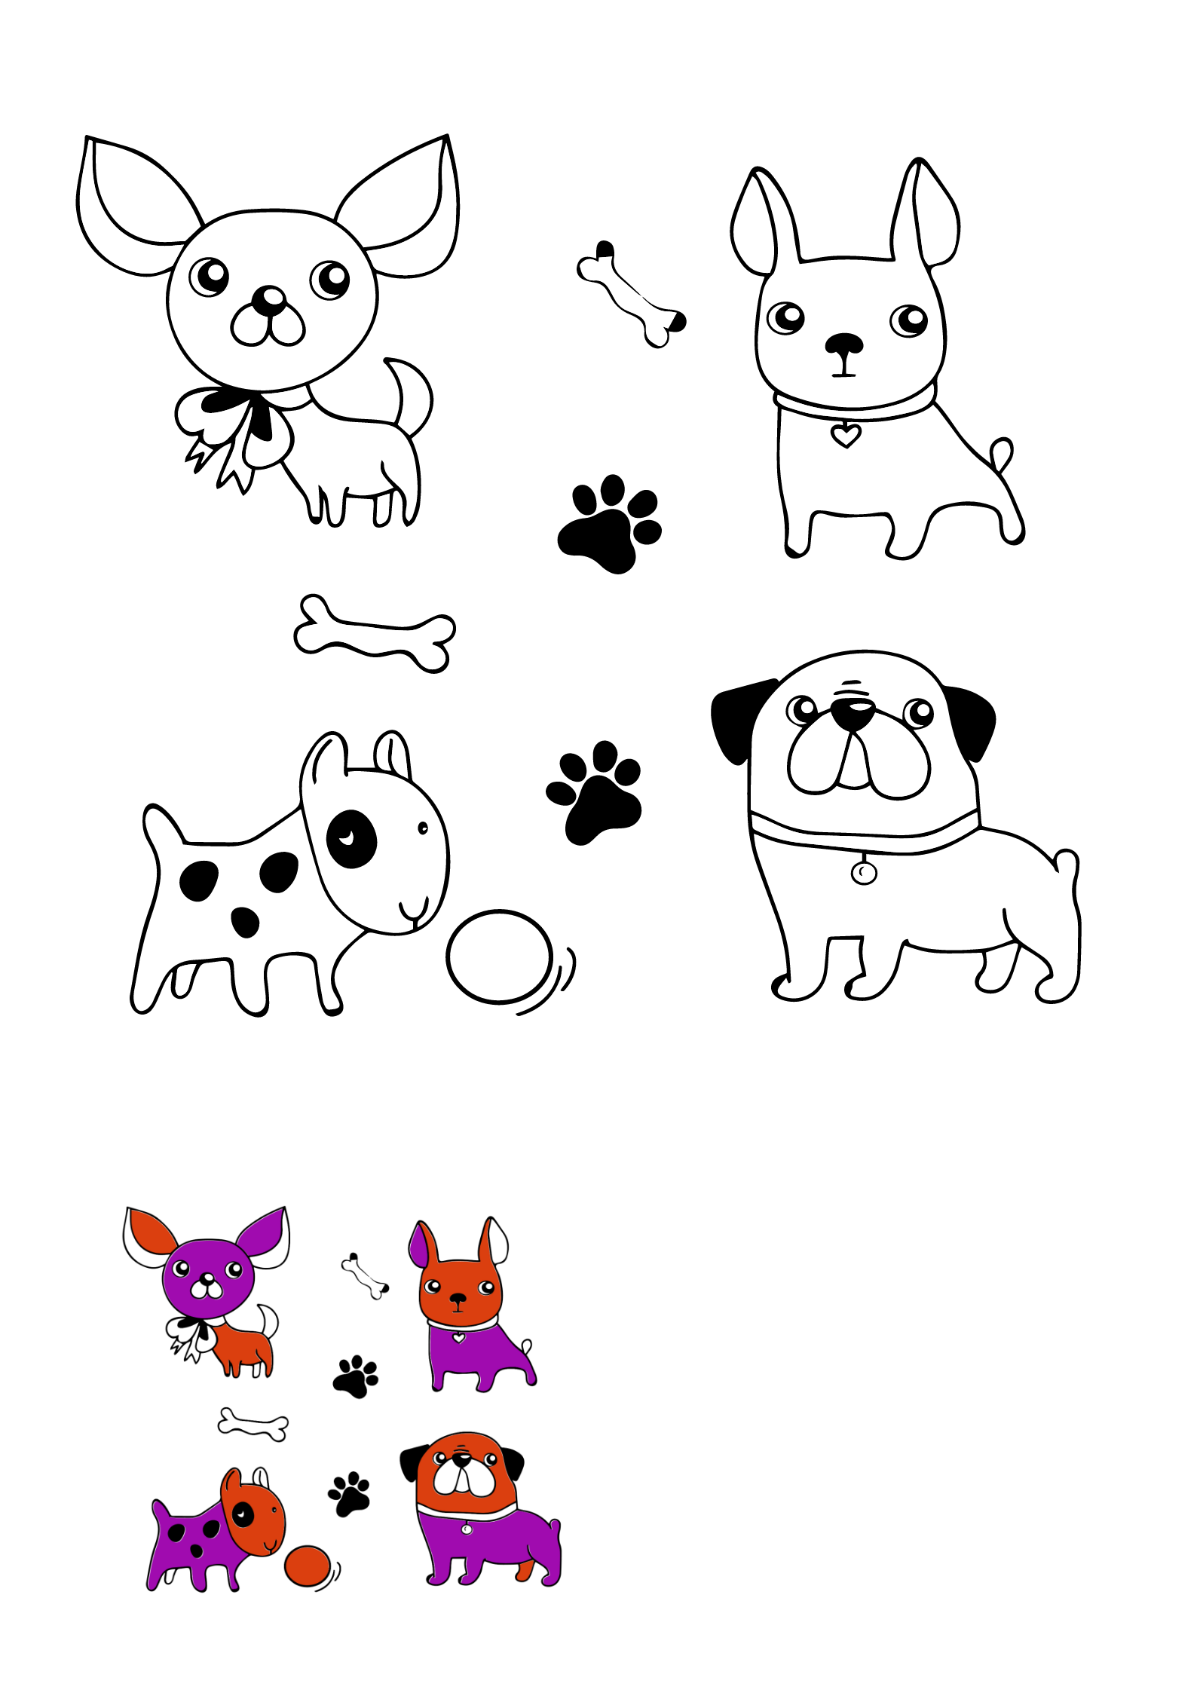 Free Dog Doodle Coloring Page Template